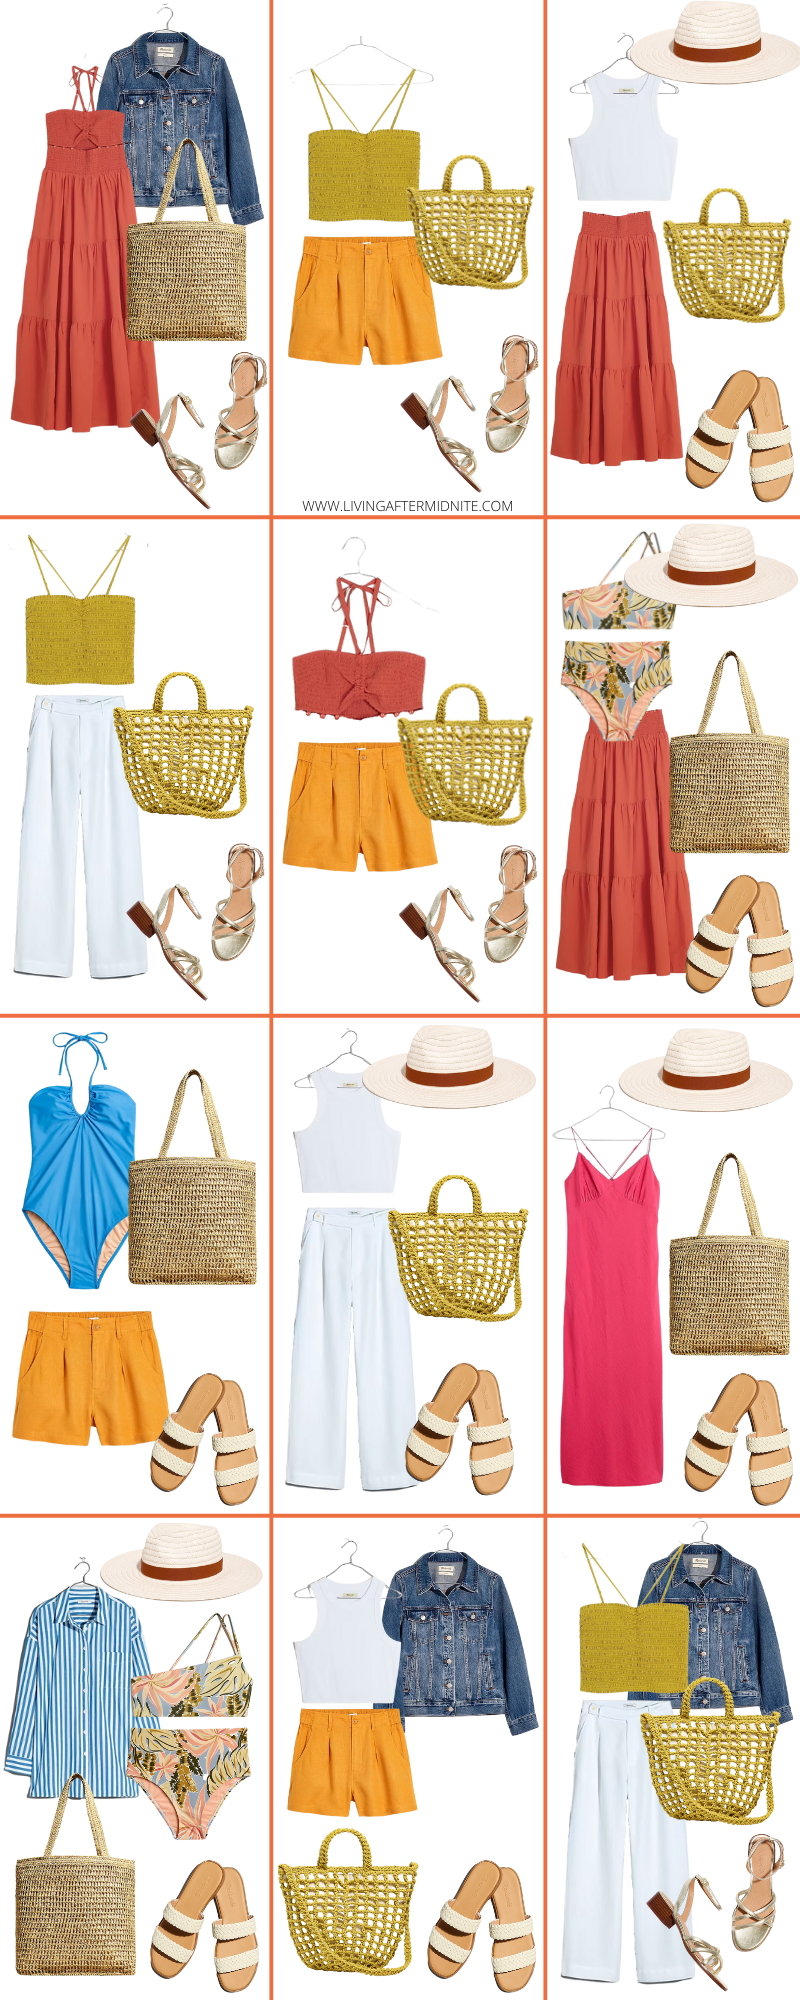 Mini Capsule: 8 Pieces, 7 Spring/Summer Outfits from Madewell [+